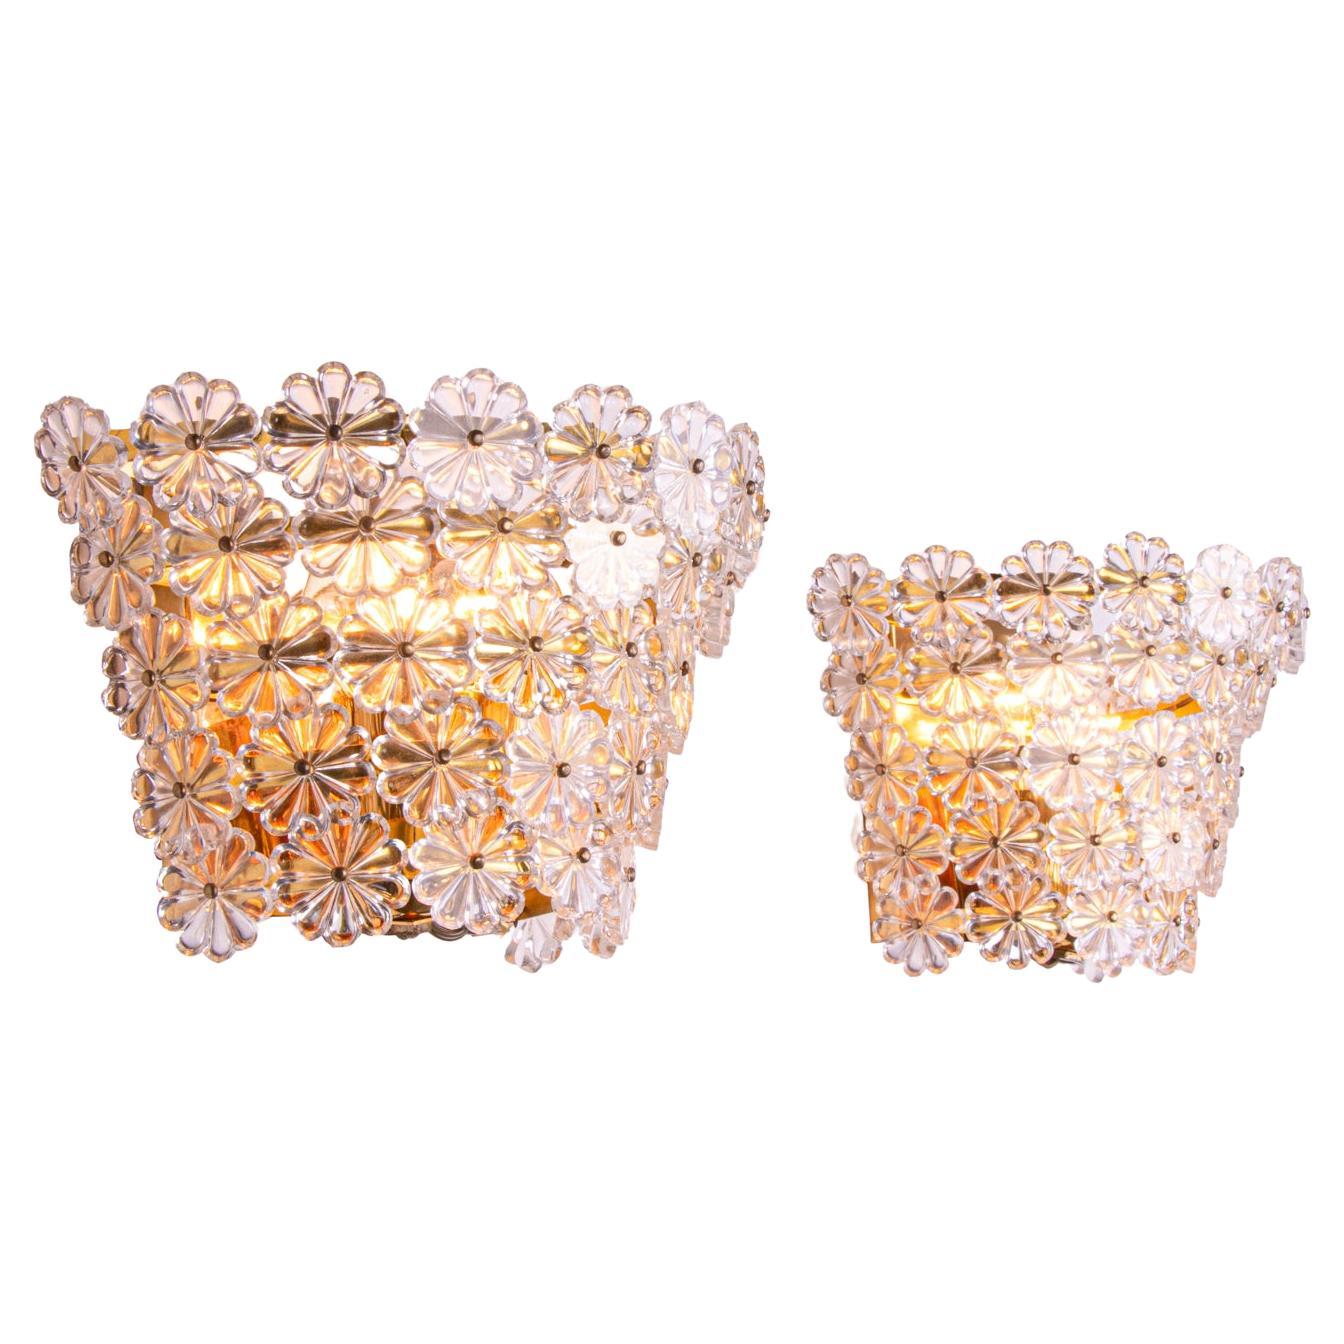 Pair of Gold-Plated Brass and Crystal Glass Wall Lamps Sconces by Emil Stejnar